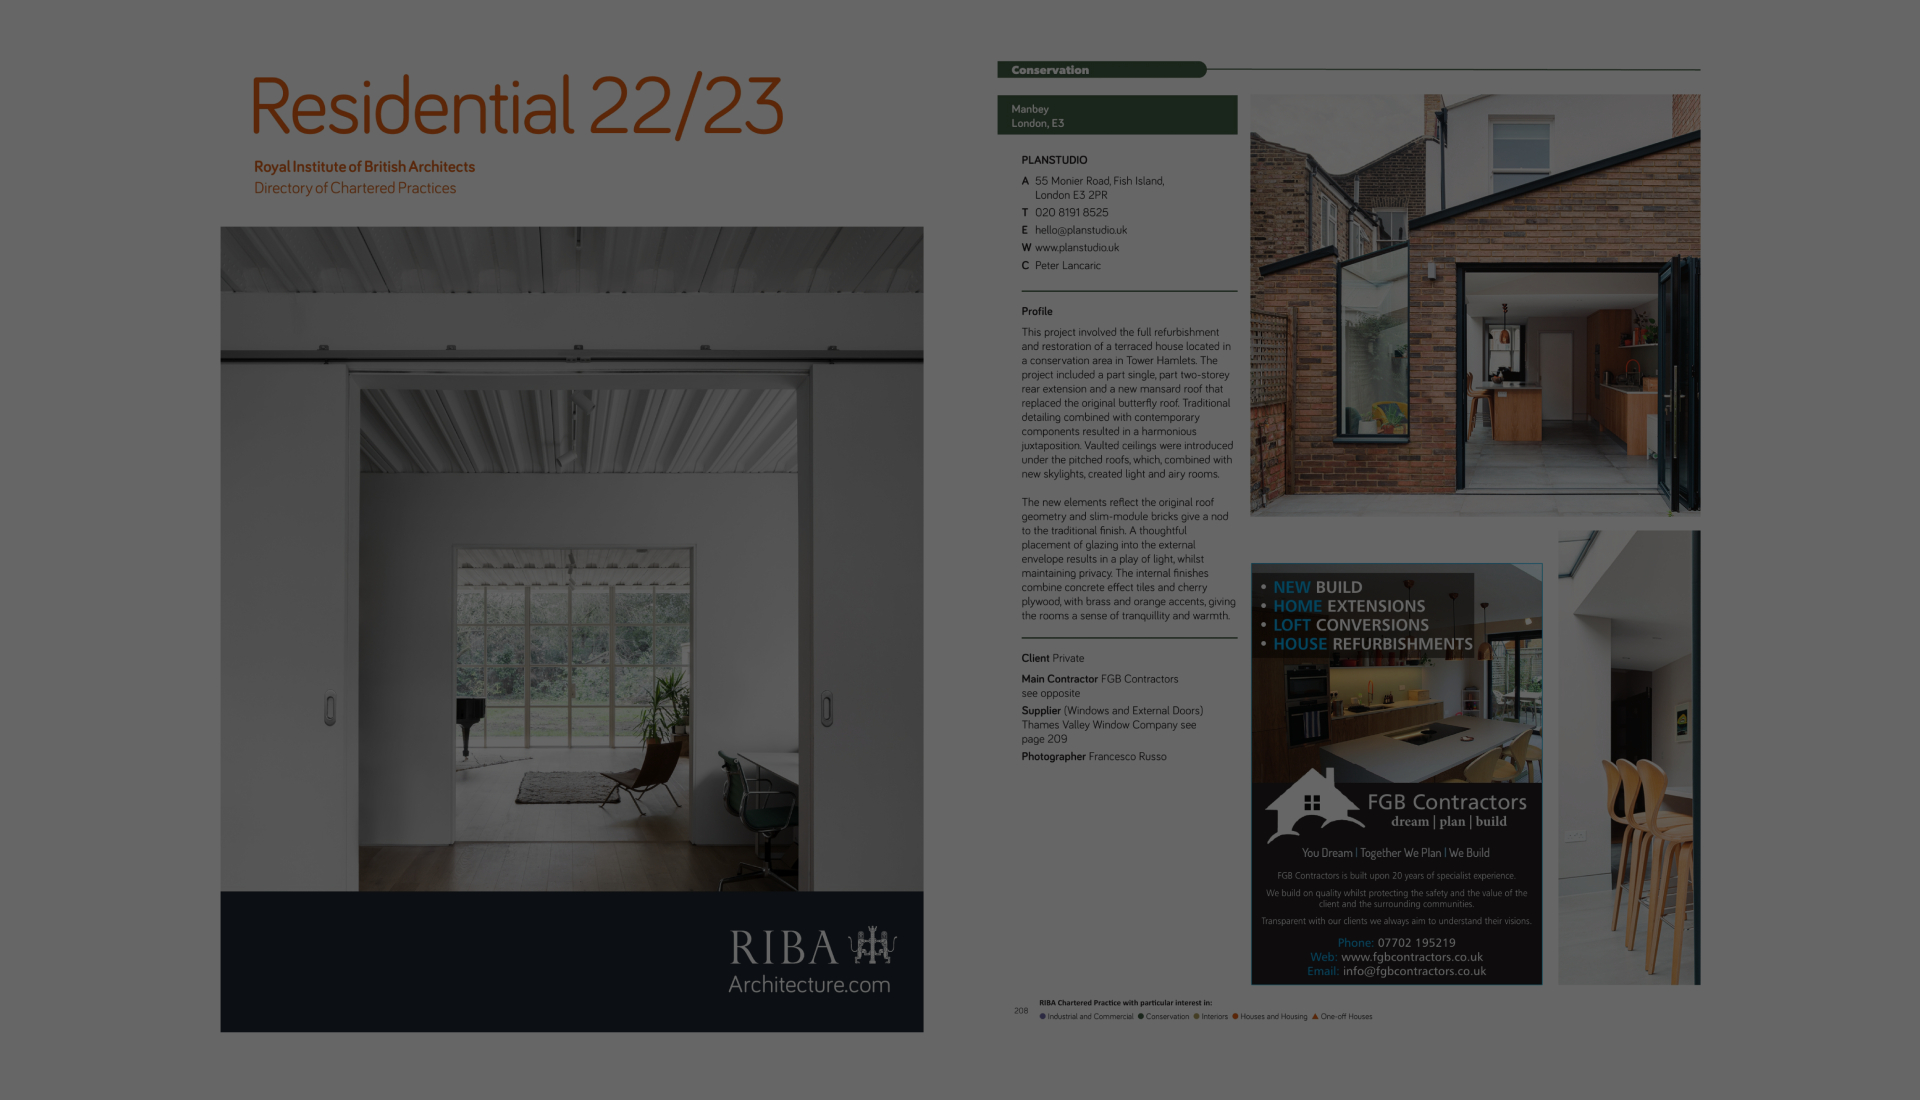 British Architects Directory of Chartered Practices for the Residential Directory 22/23